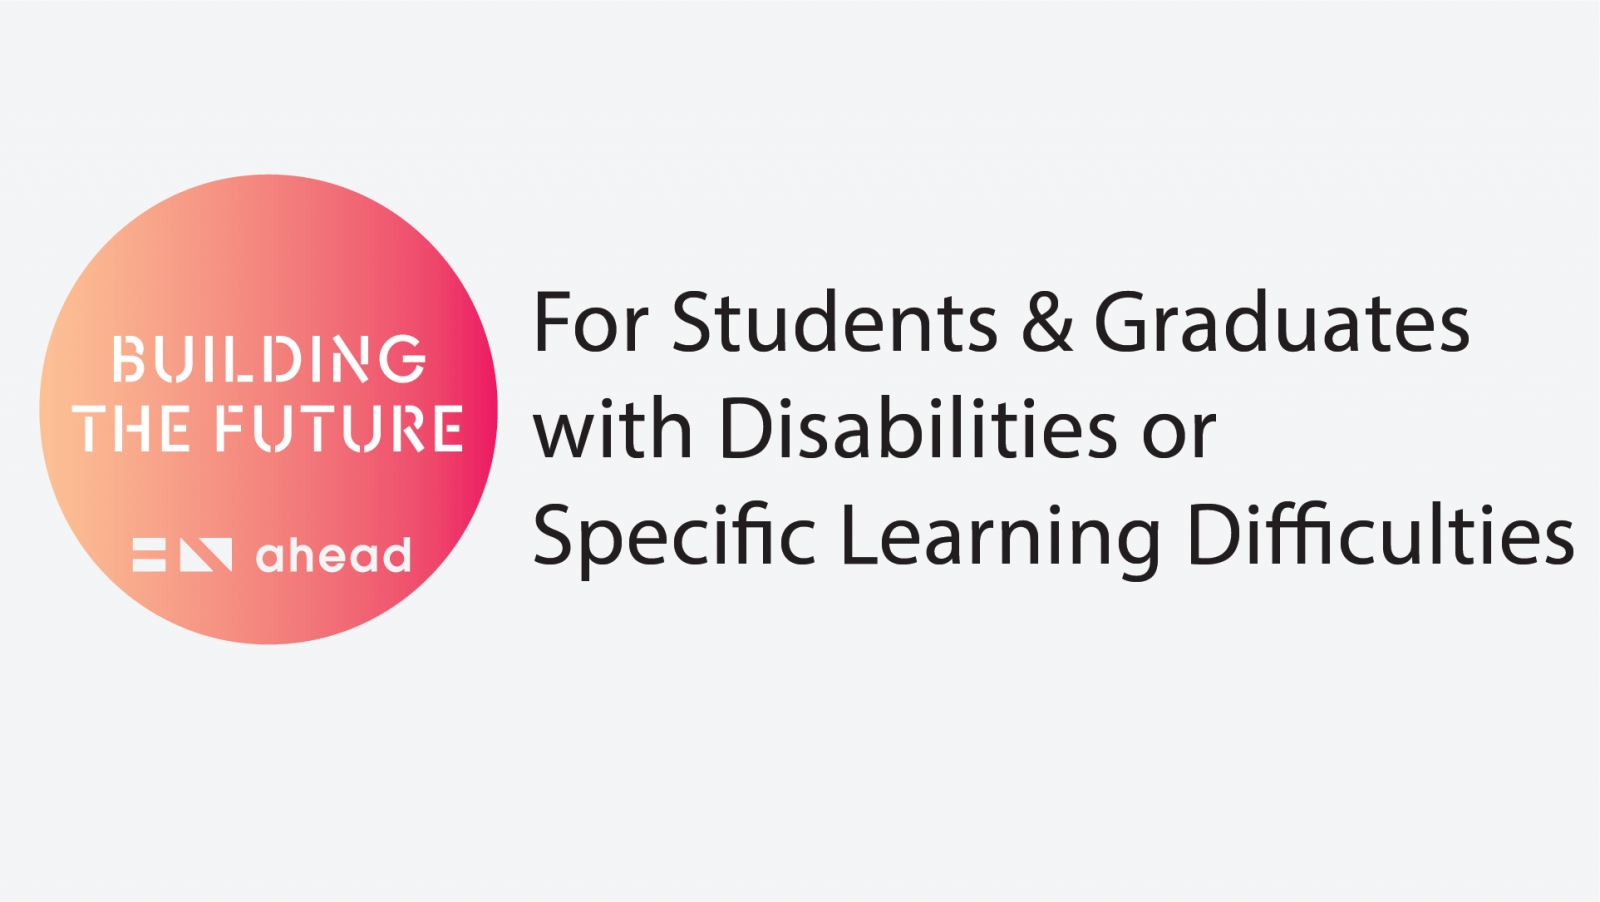 Building the Future - For Students and Graduates with Disabilities or Specific Learning Difficulties